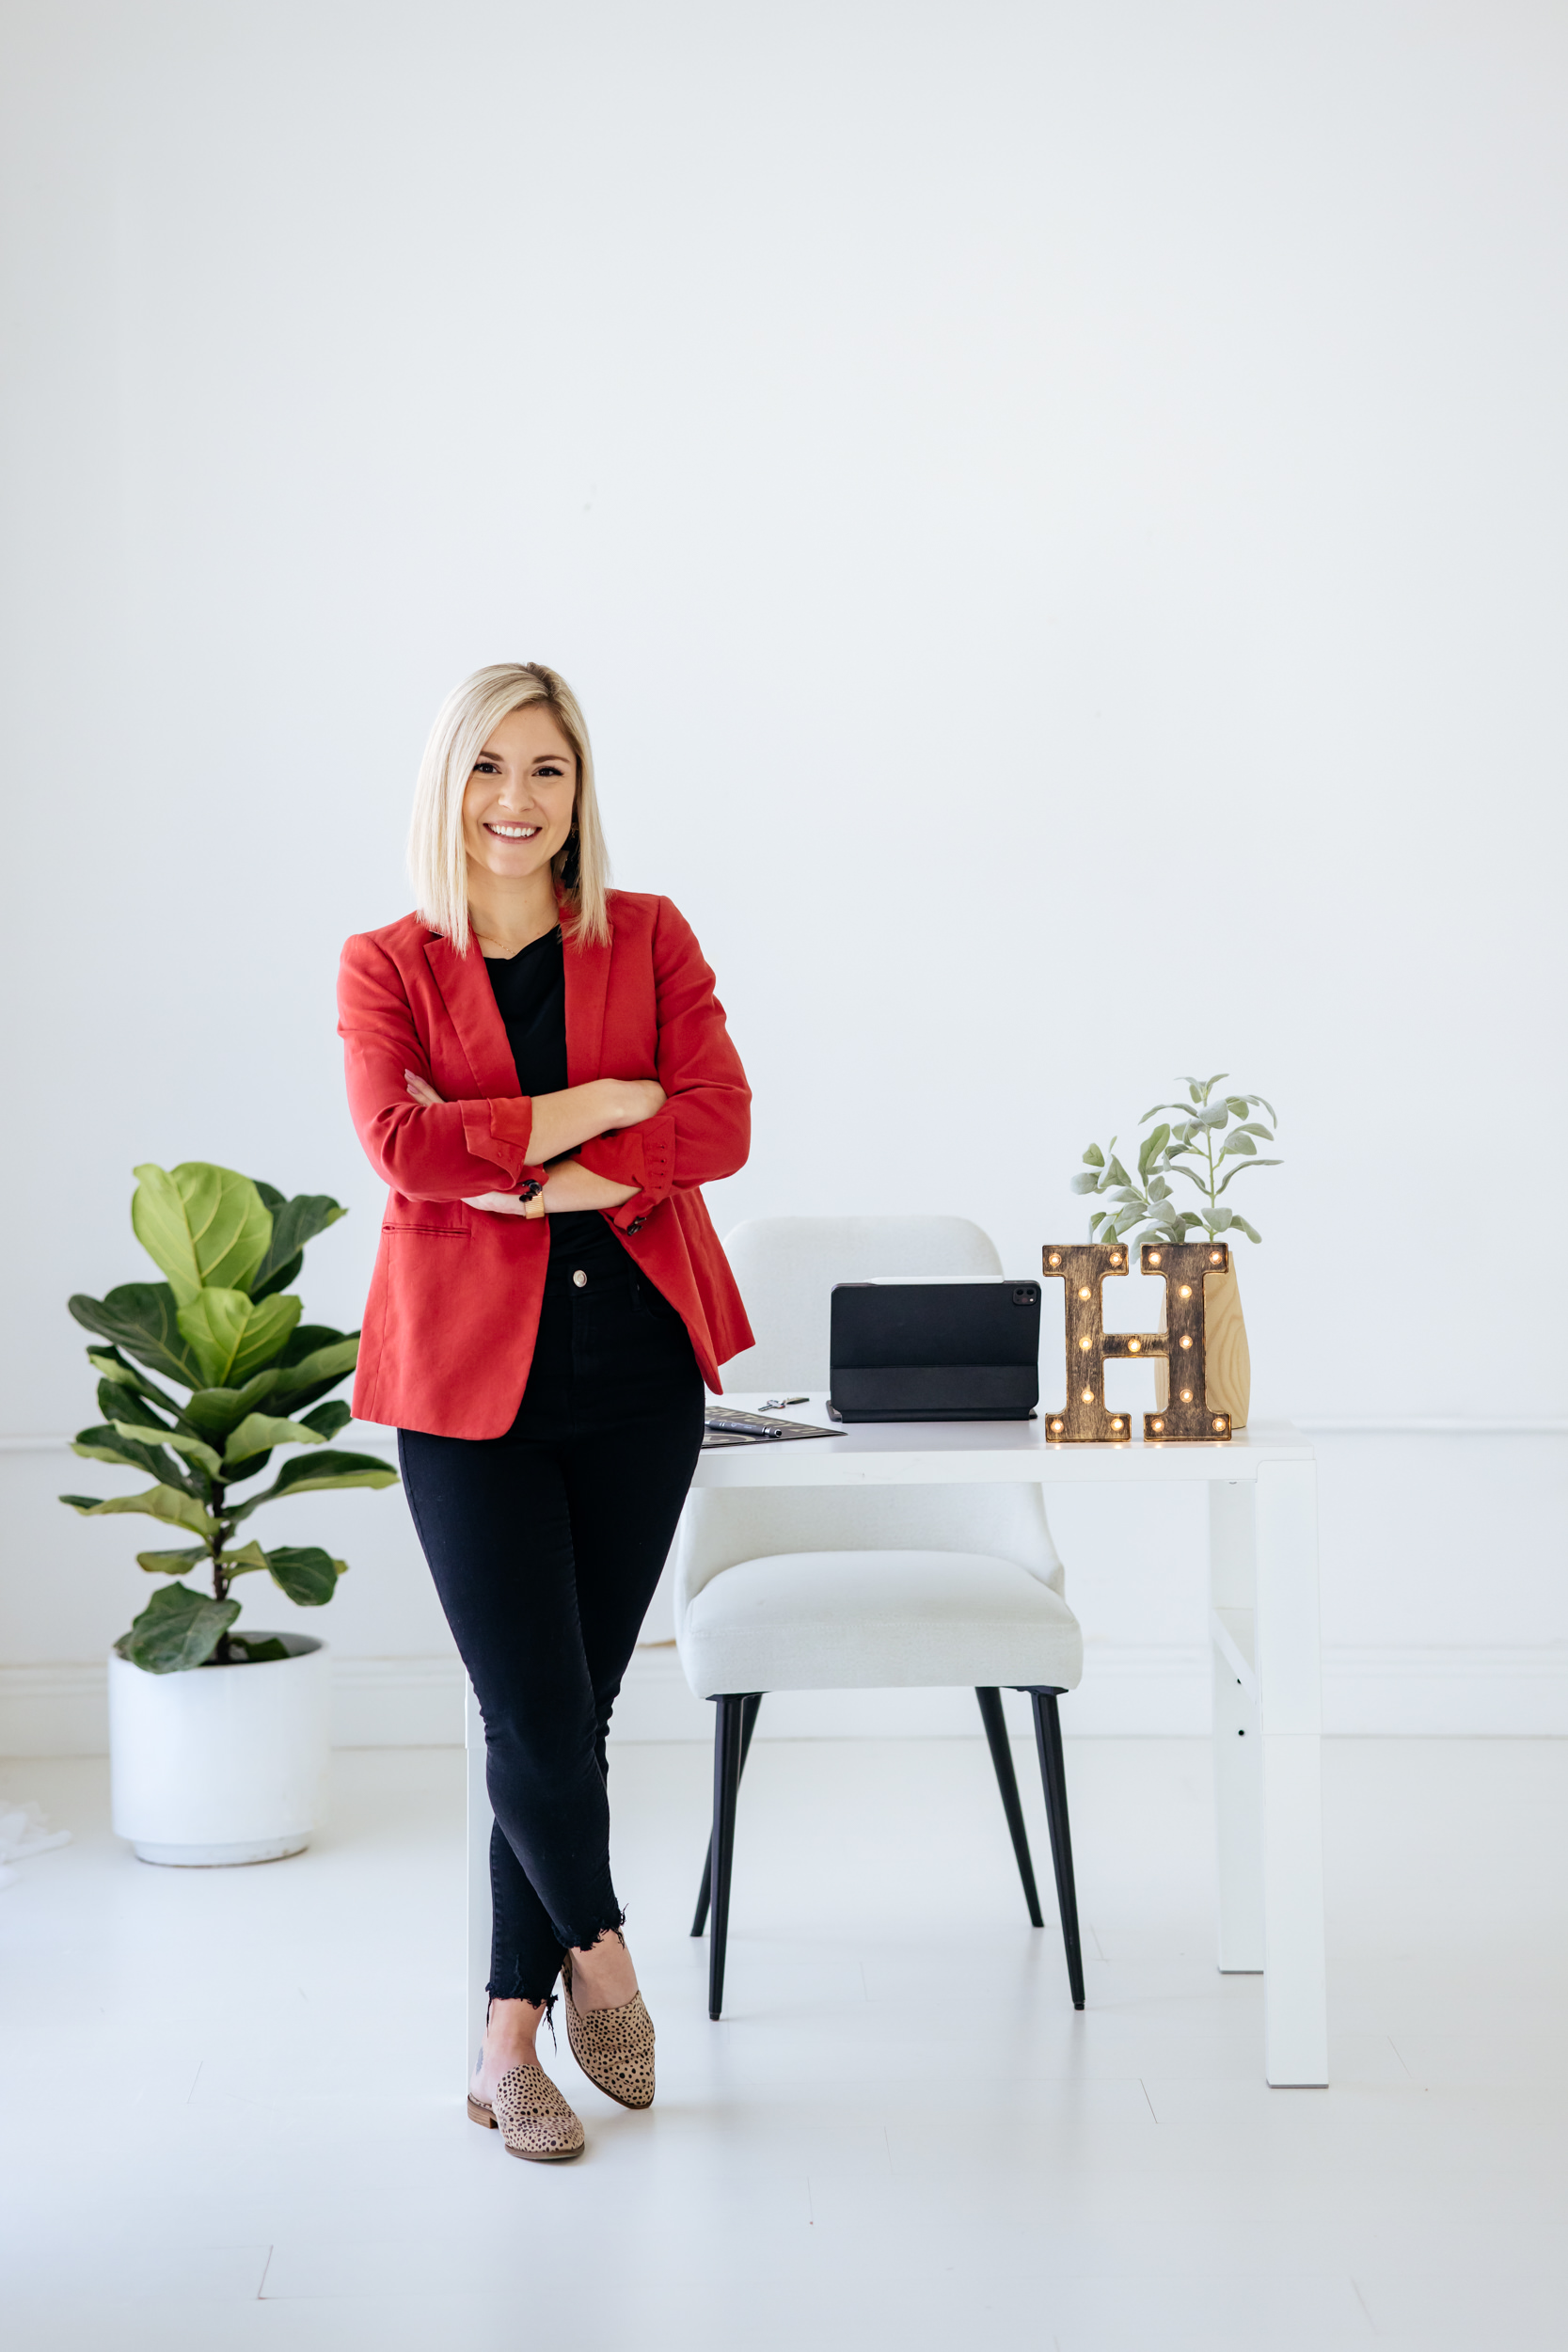 Florida Realtor Jessica Houston. Click here to be inspired by this realtor's clean, personality filled personal branding photoshoot!